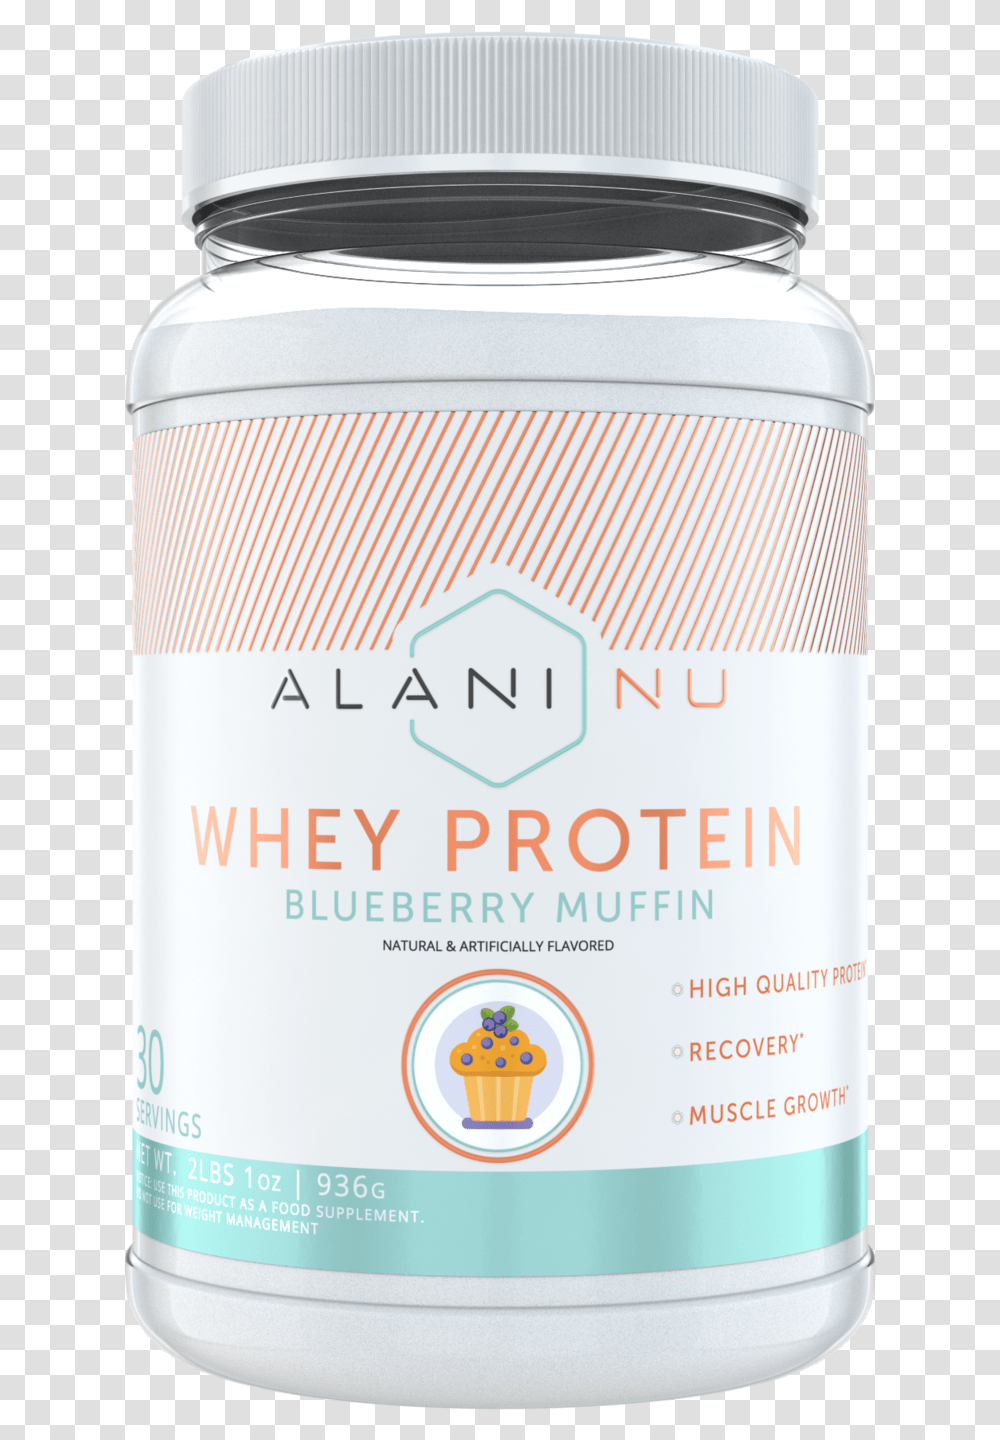 Main Product PhotoClass Gallery Placeholder Image Whey Protein, Cosmetics, Bottle, Beverage, Tin Transparent Png